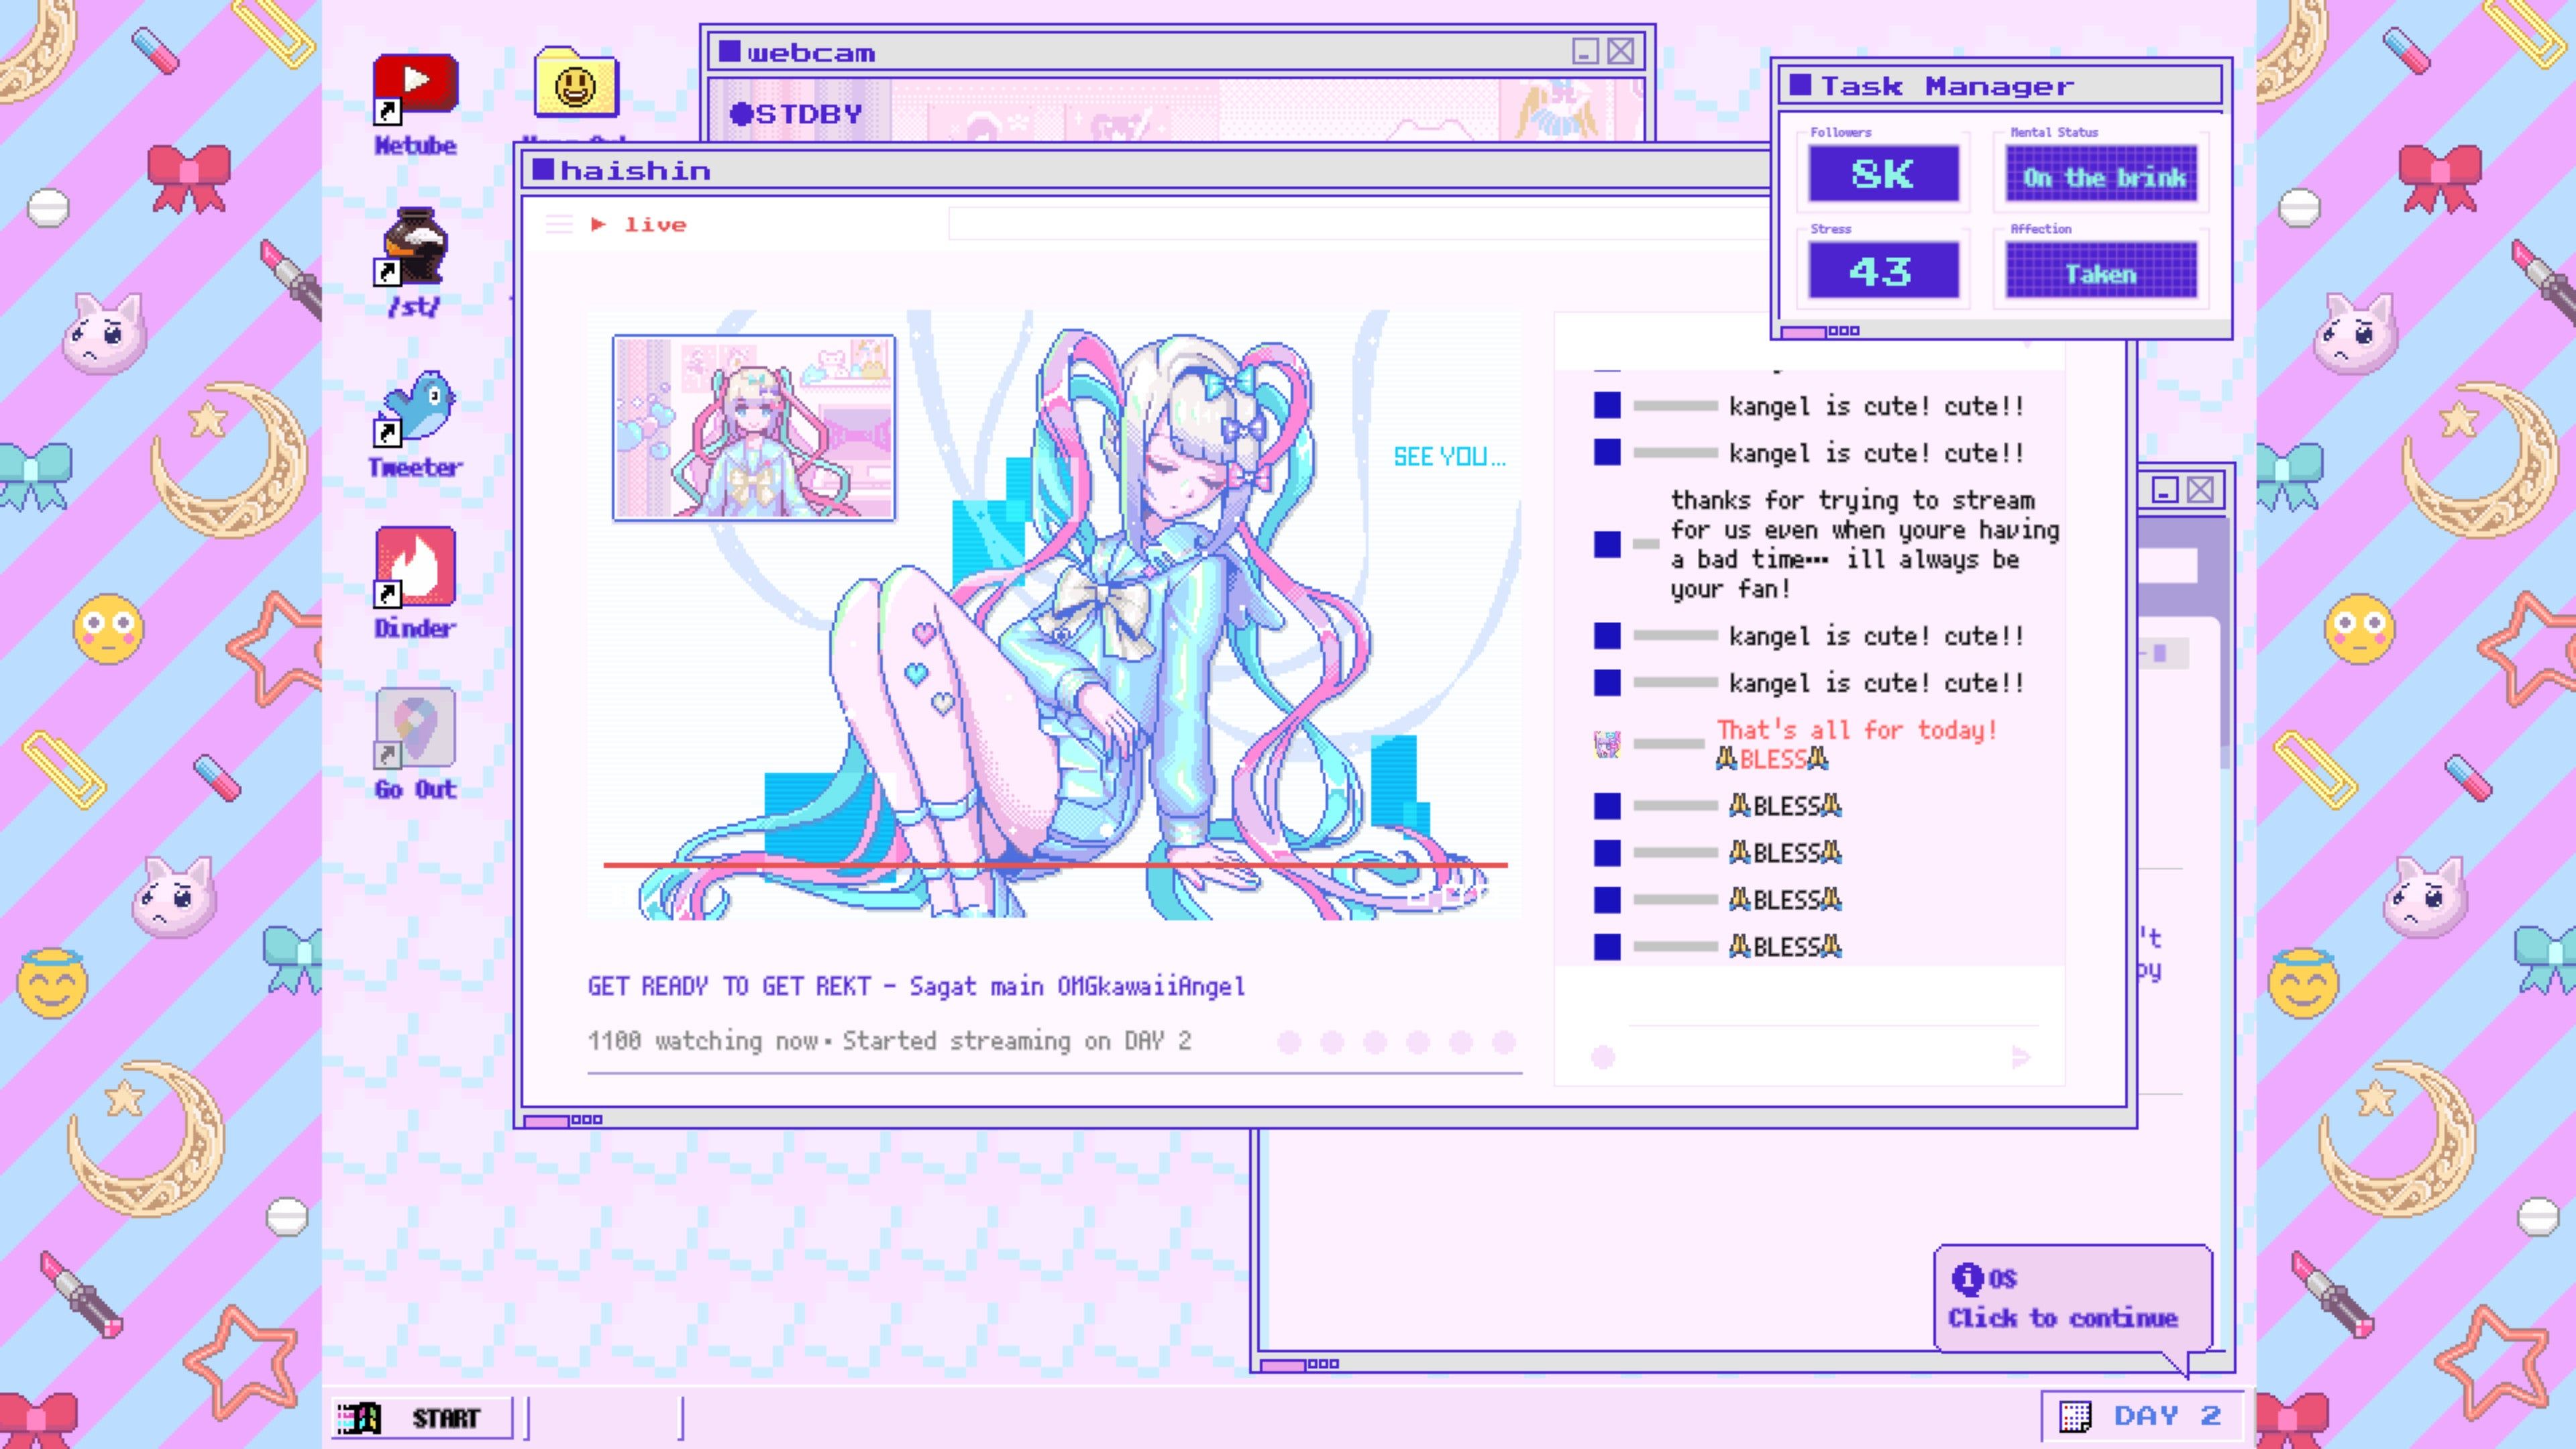 A screenshot of a digital drawing of a character in a pastel pixelated world. - Webcore